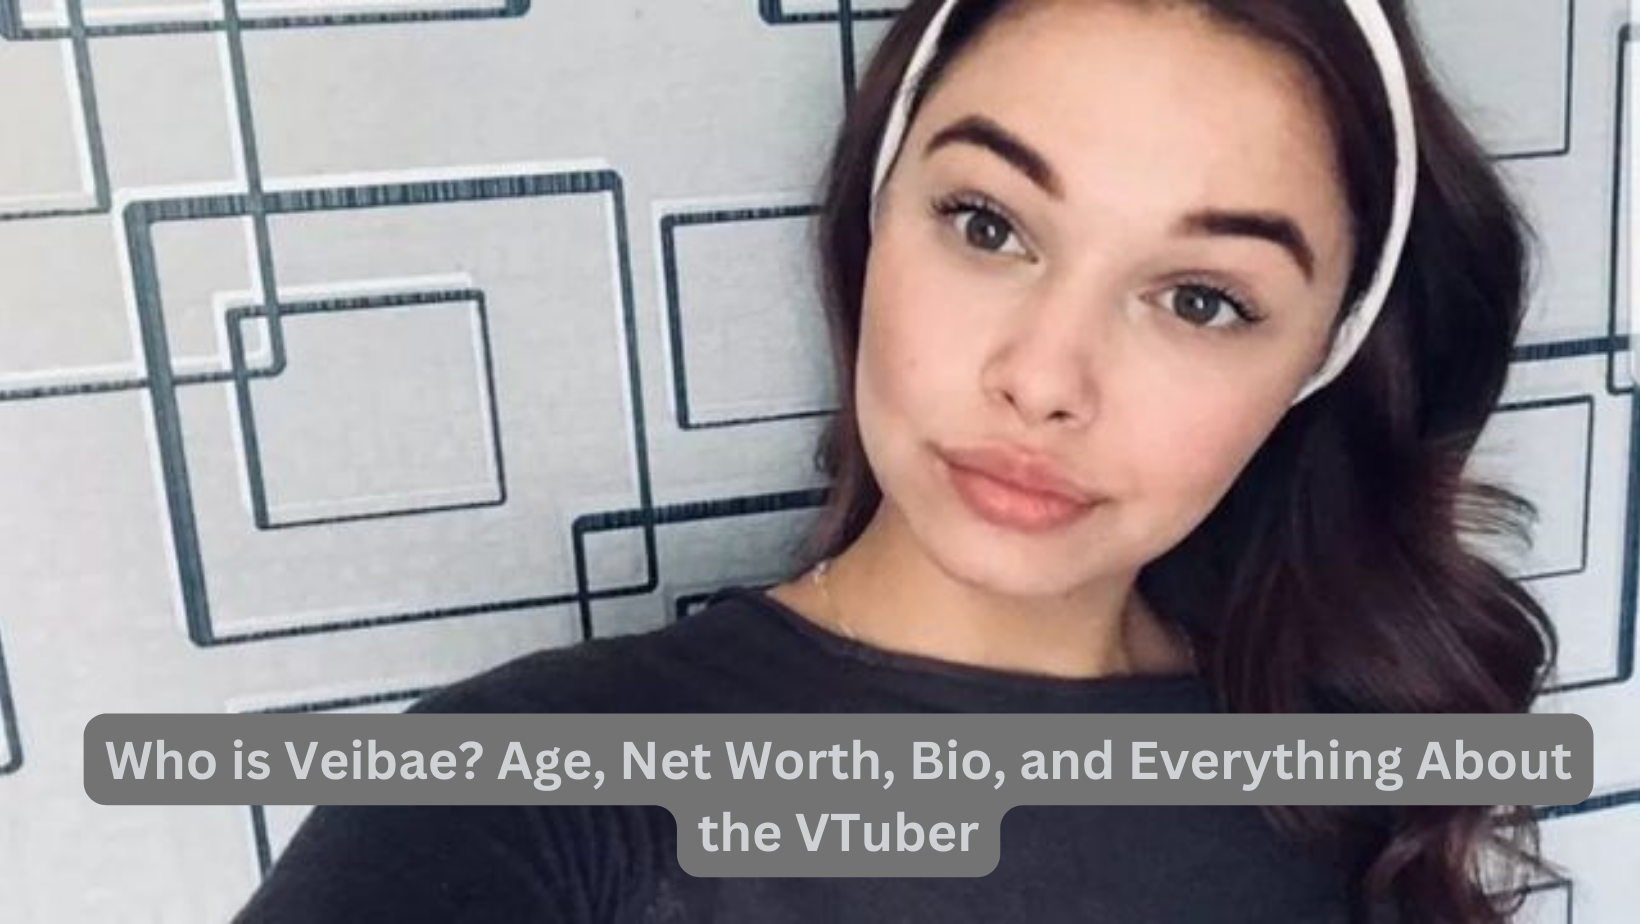 All the details about Veibae